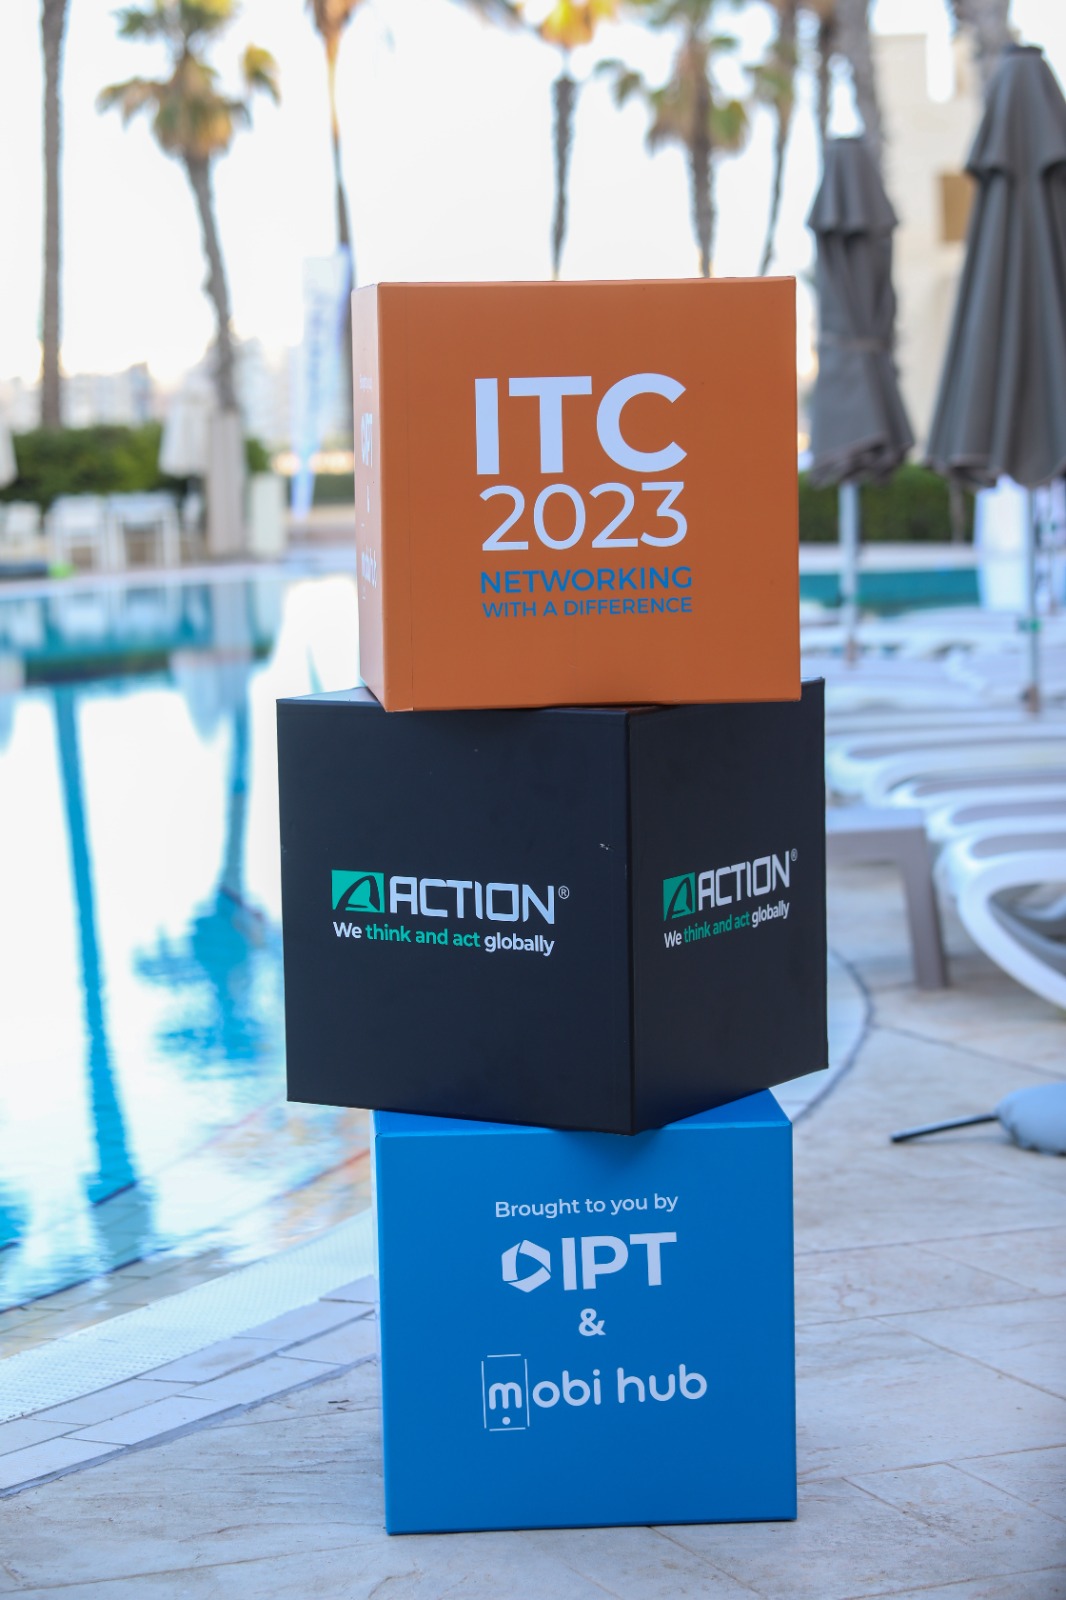 ACTION S.A. is a sponsor of ITC Malta 2023